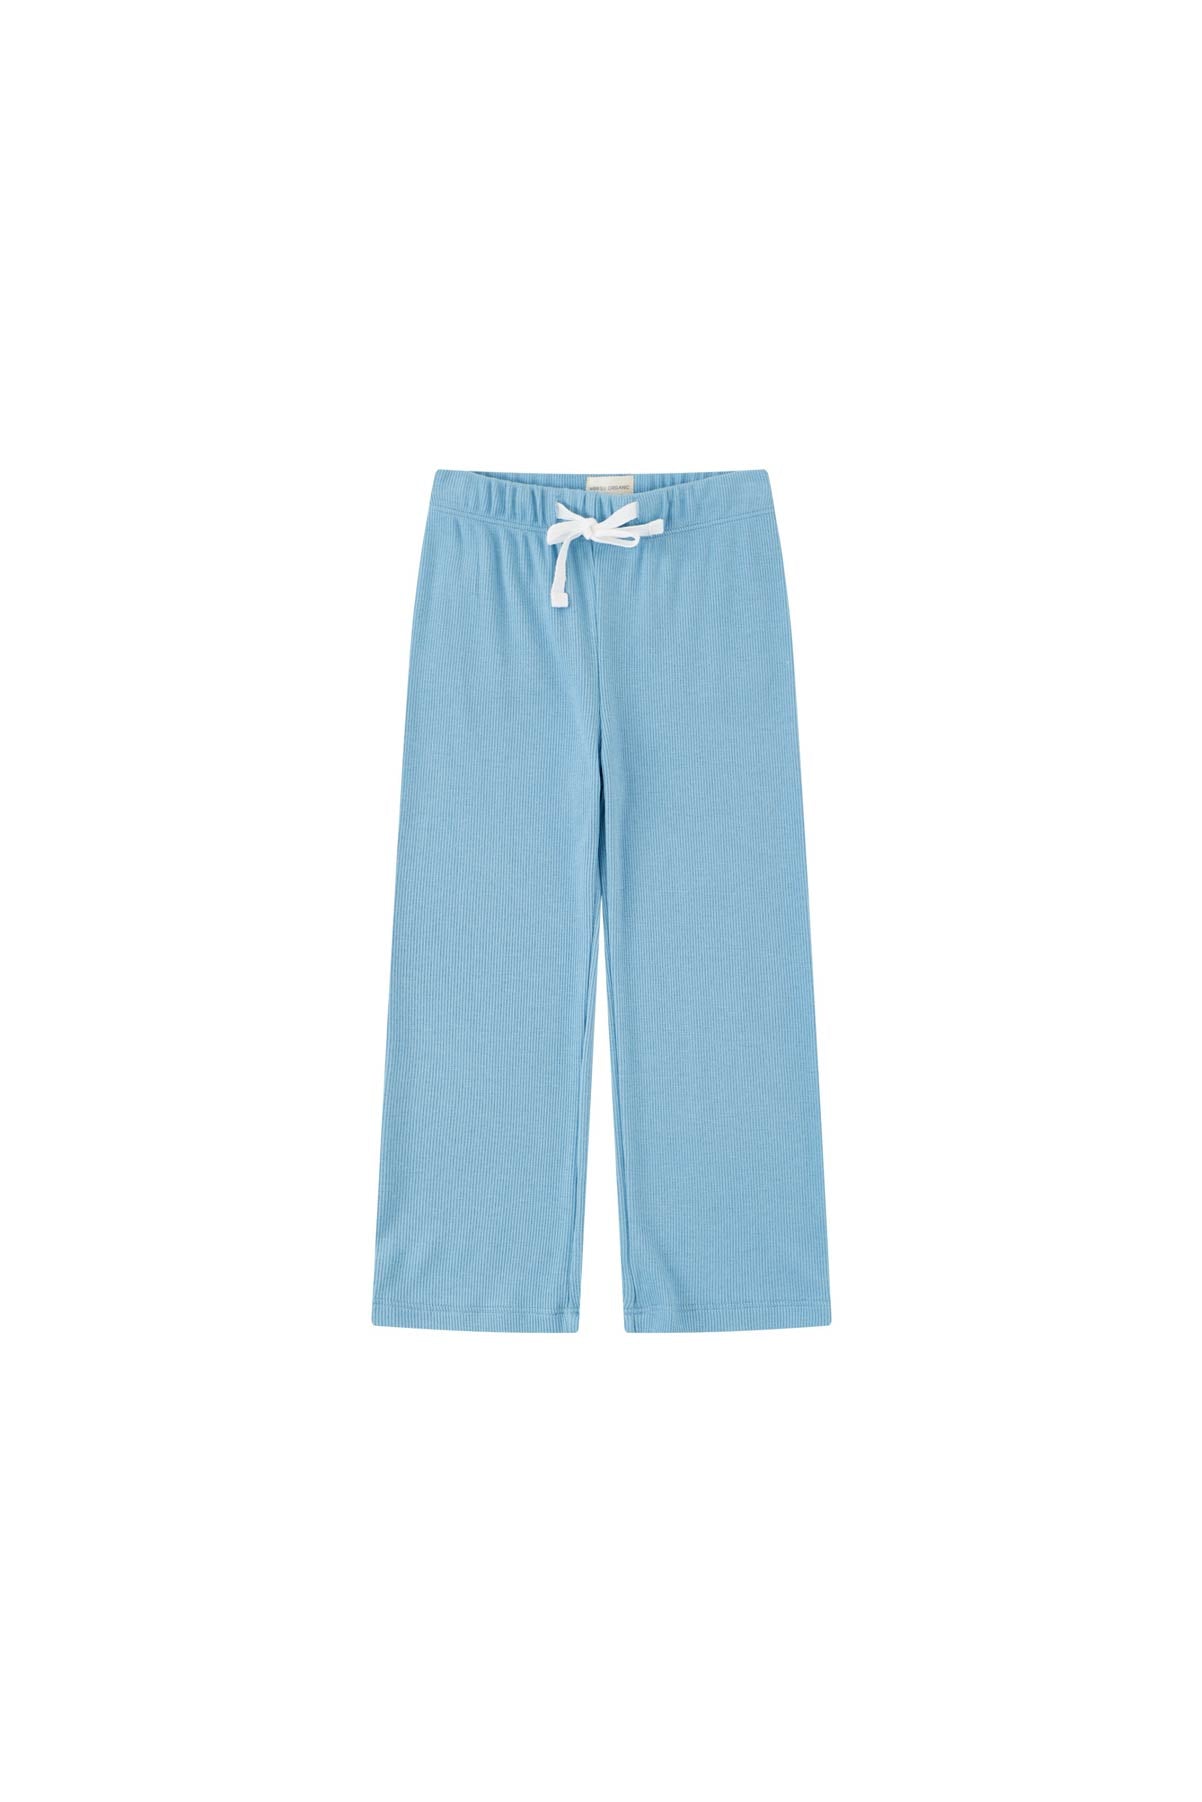 Toddler Organic Bamboo Cropped Pant-Delphinium Blue